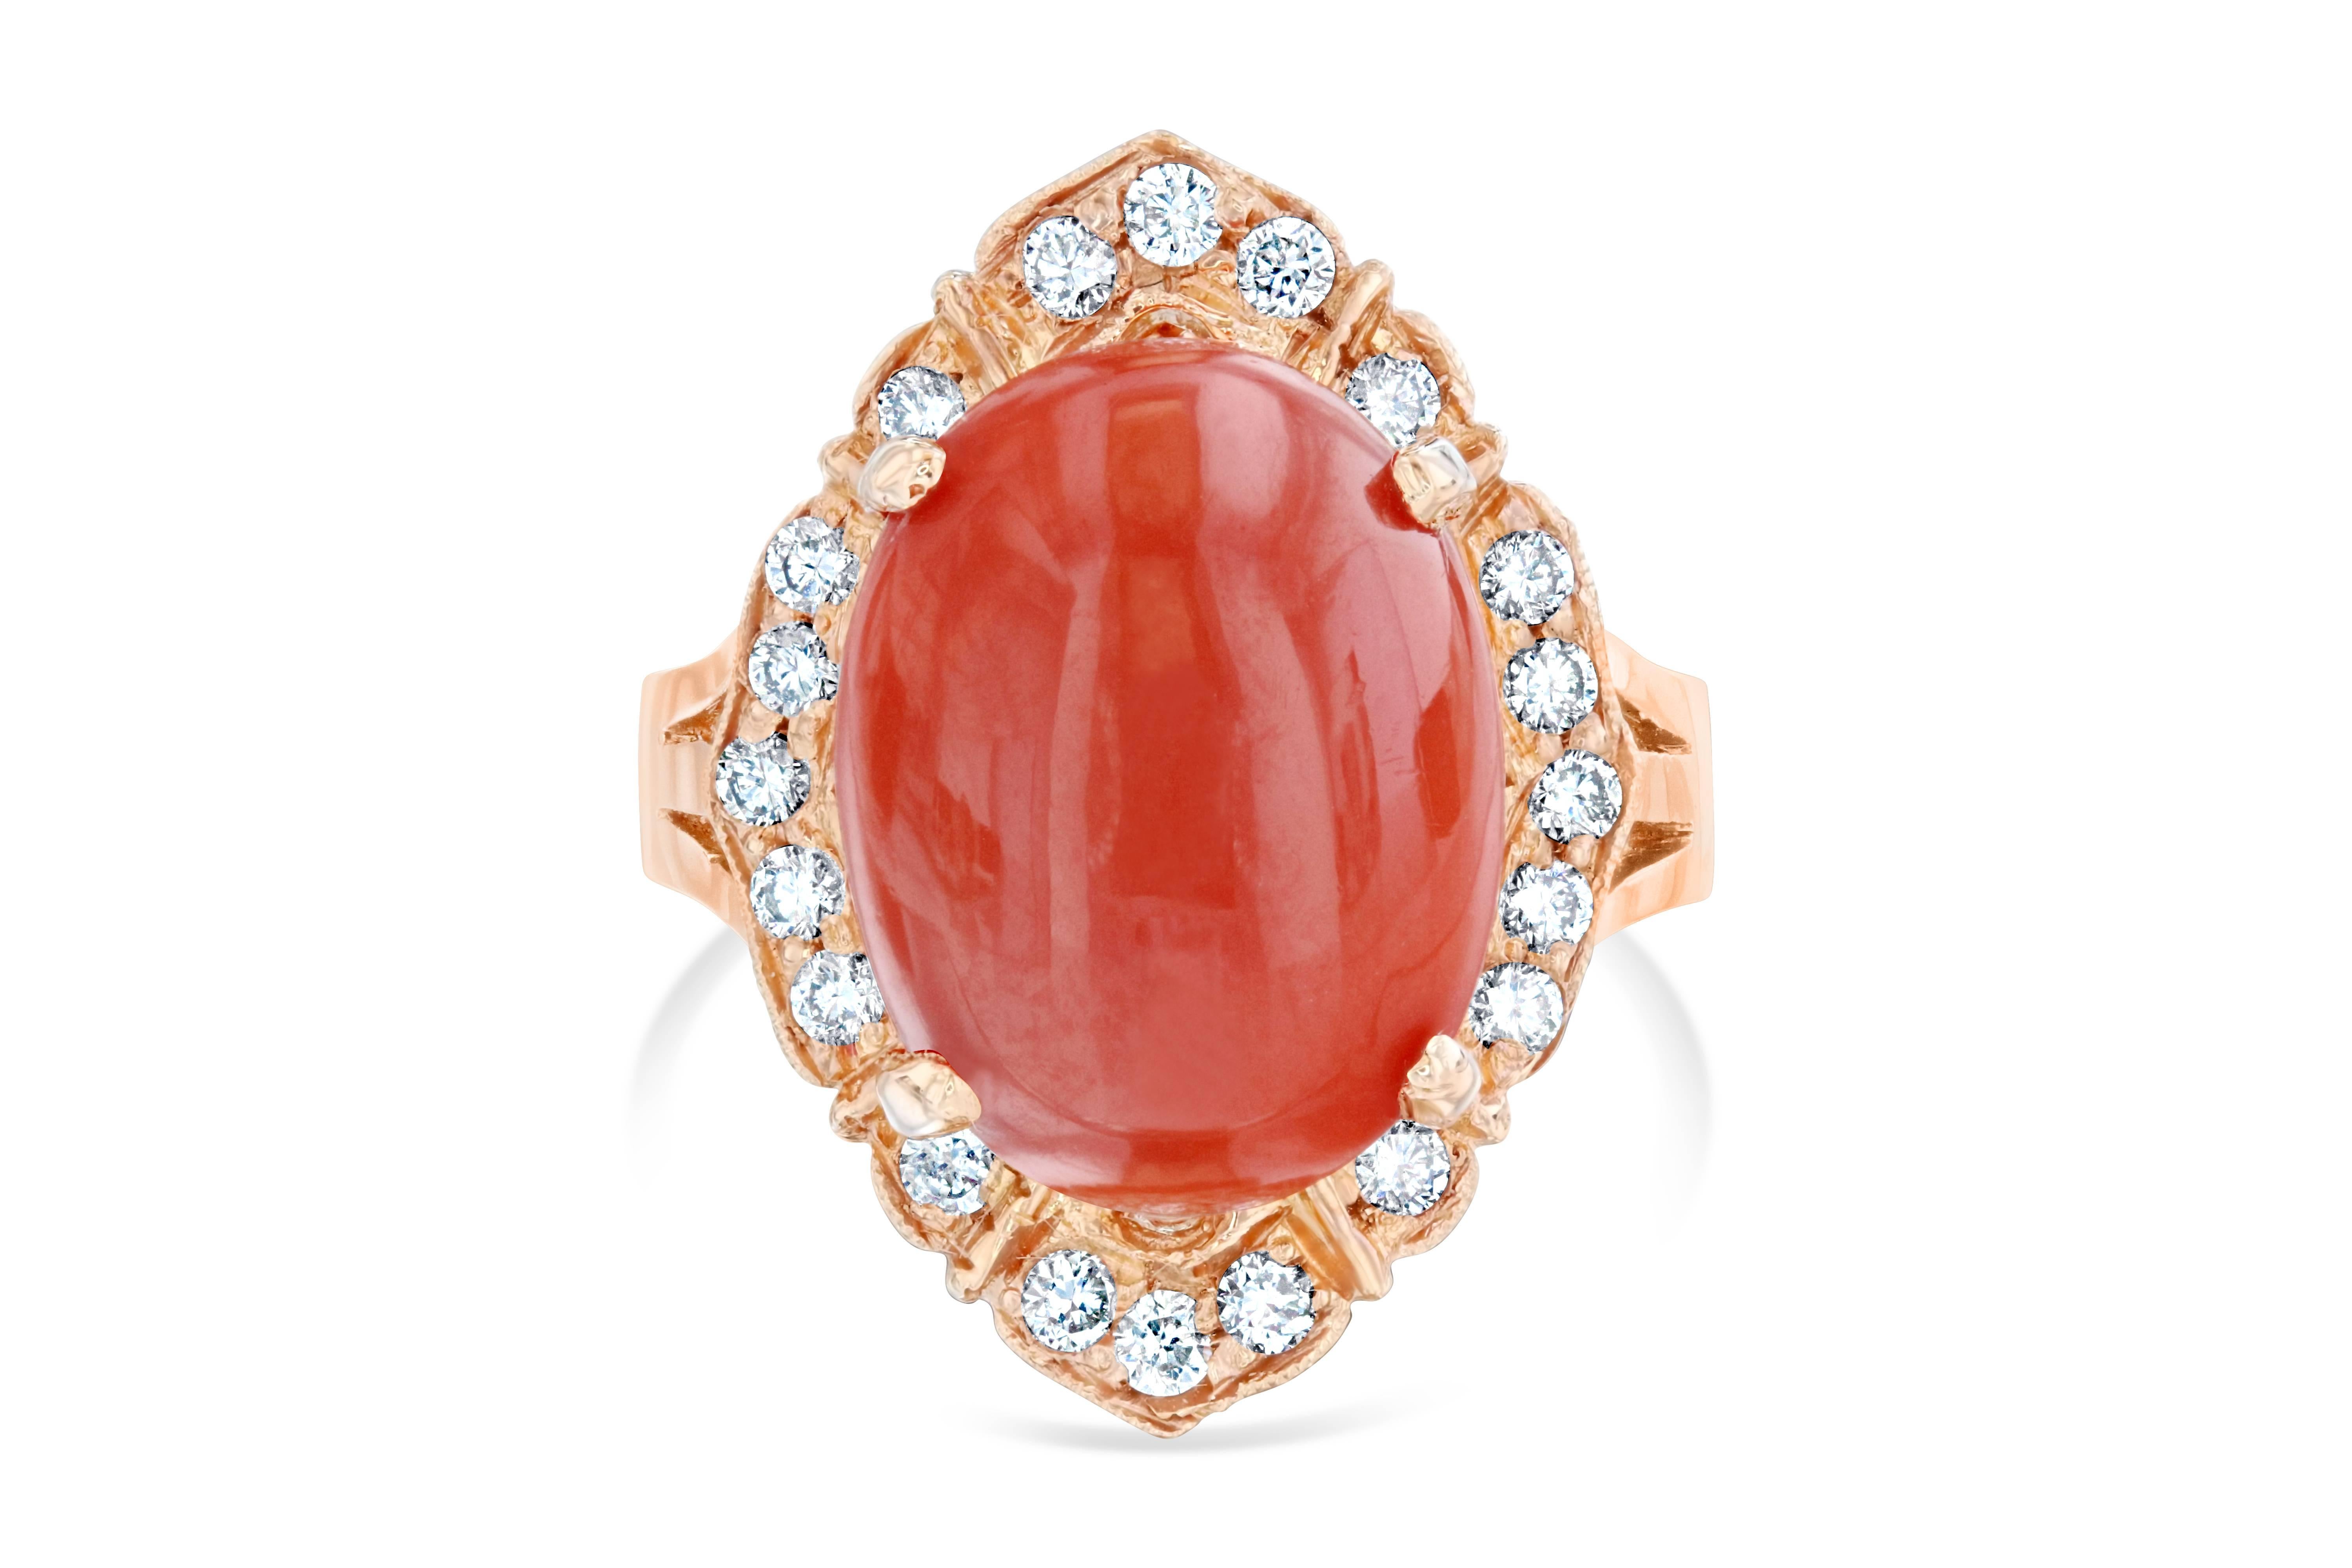 This beautiful ring can be worn however one pleases! It is delicately set and can be the most unique engagement or wedding ring or perhaps even an everyday ring...

The Coral is 7.02 Carats and is adorned by 20 Round Cut Diamonds weighing 0.46